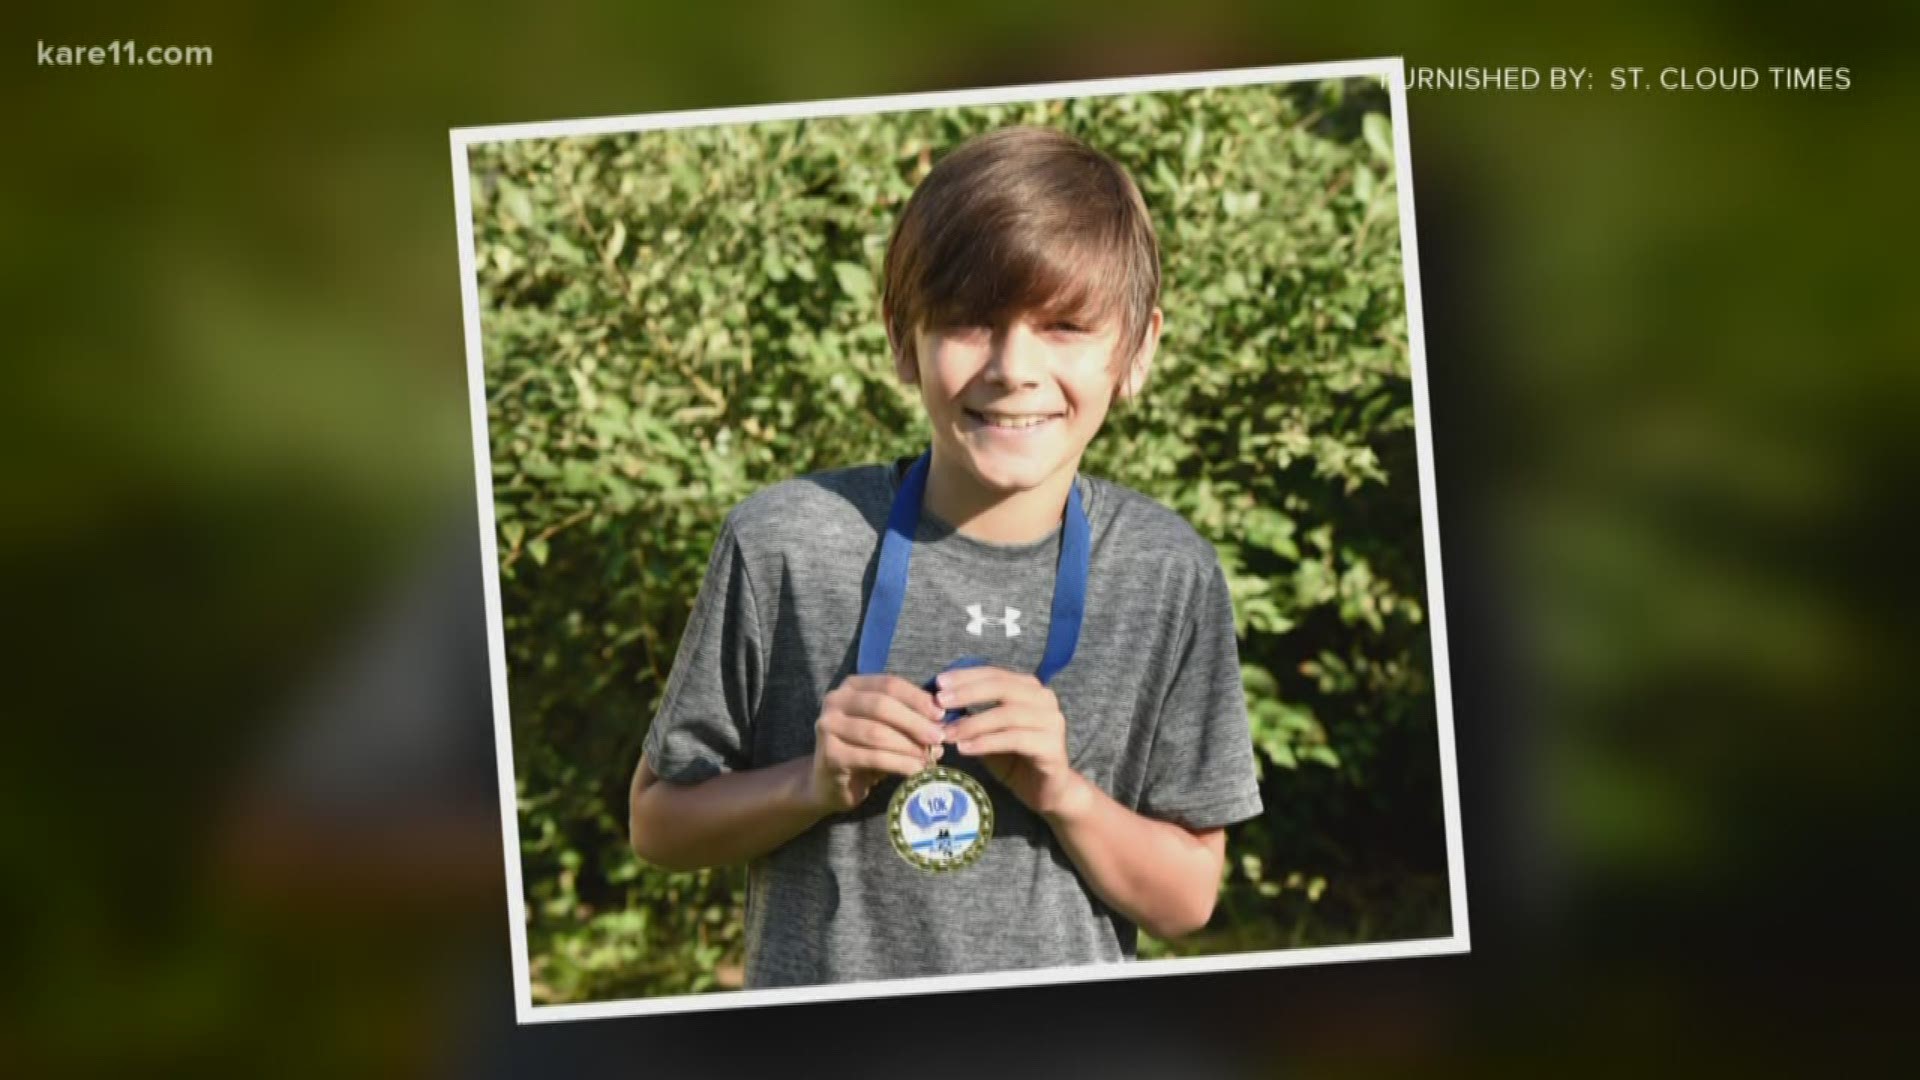 Race organizers told 9-year-old Kade Lovell's mother he finished in first place and she thought they meant in his age group. But he was first-place overall.